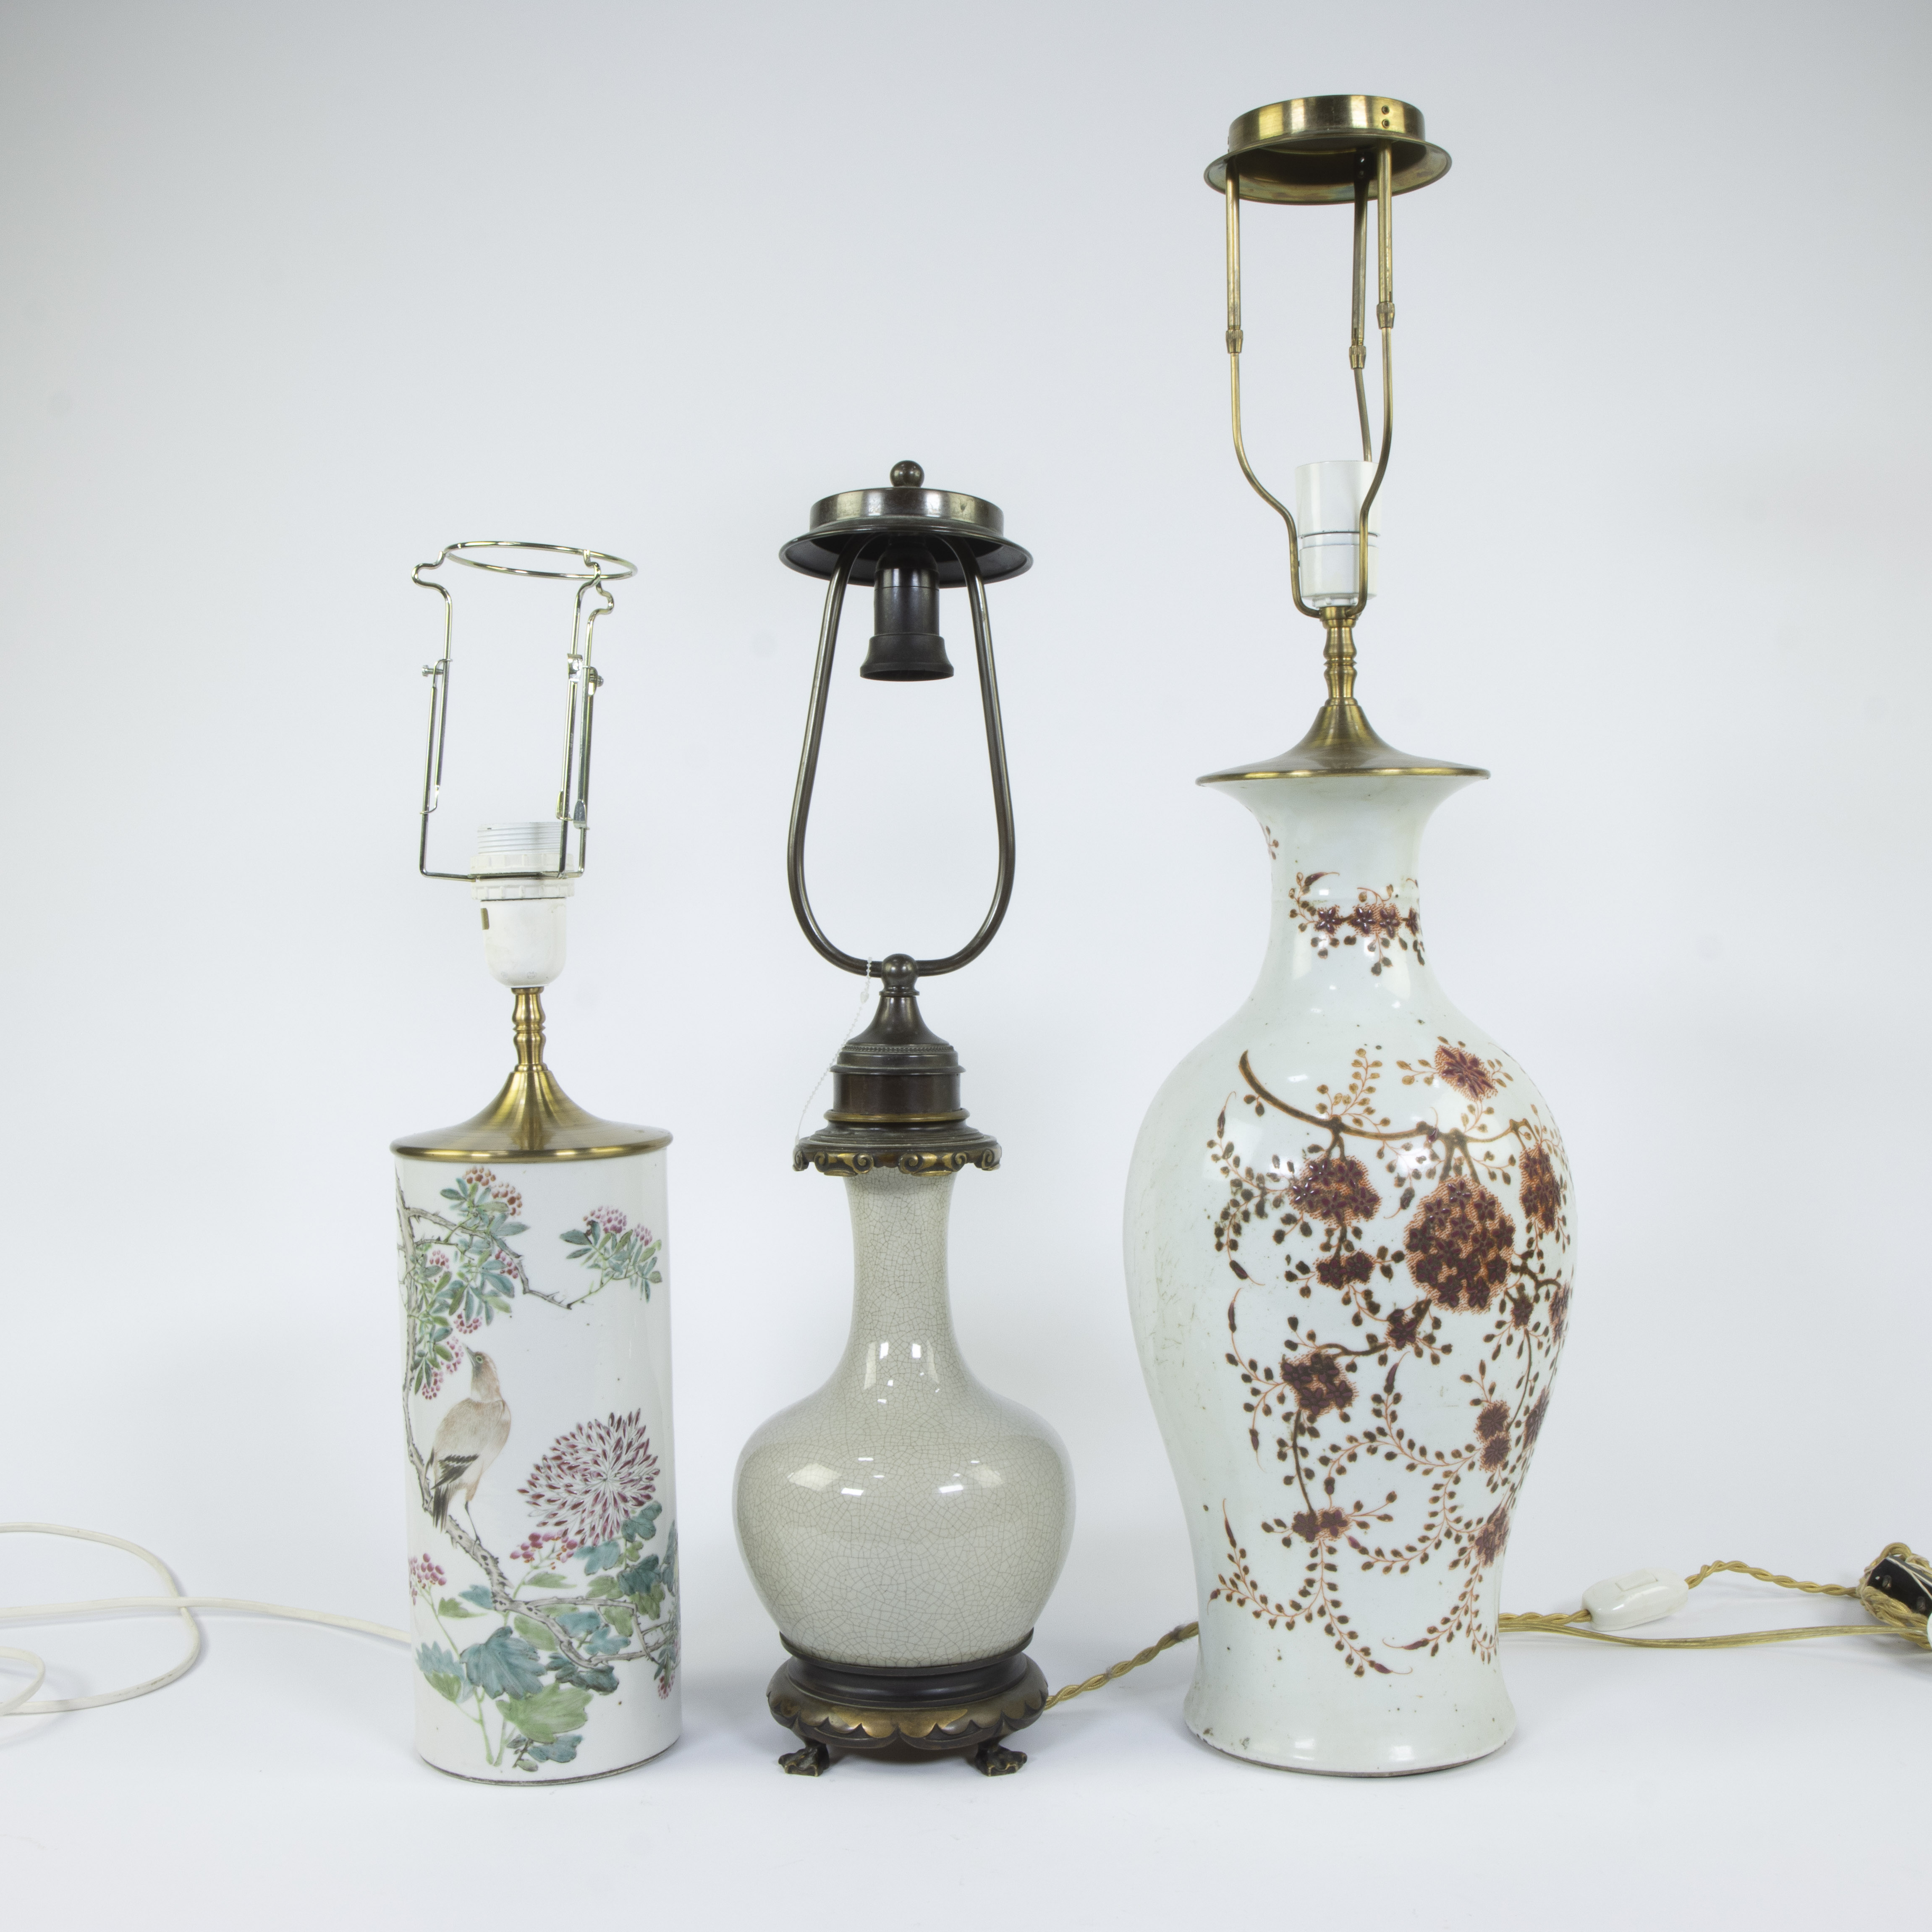 Collection of 3 Chinese vases transformed into lampadaires